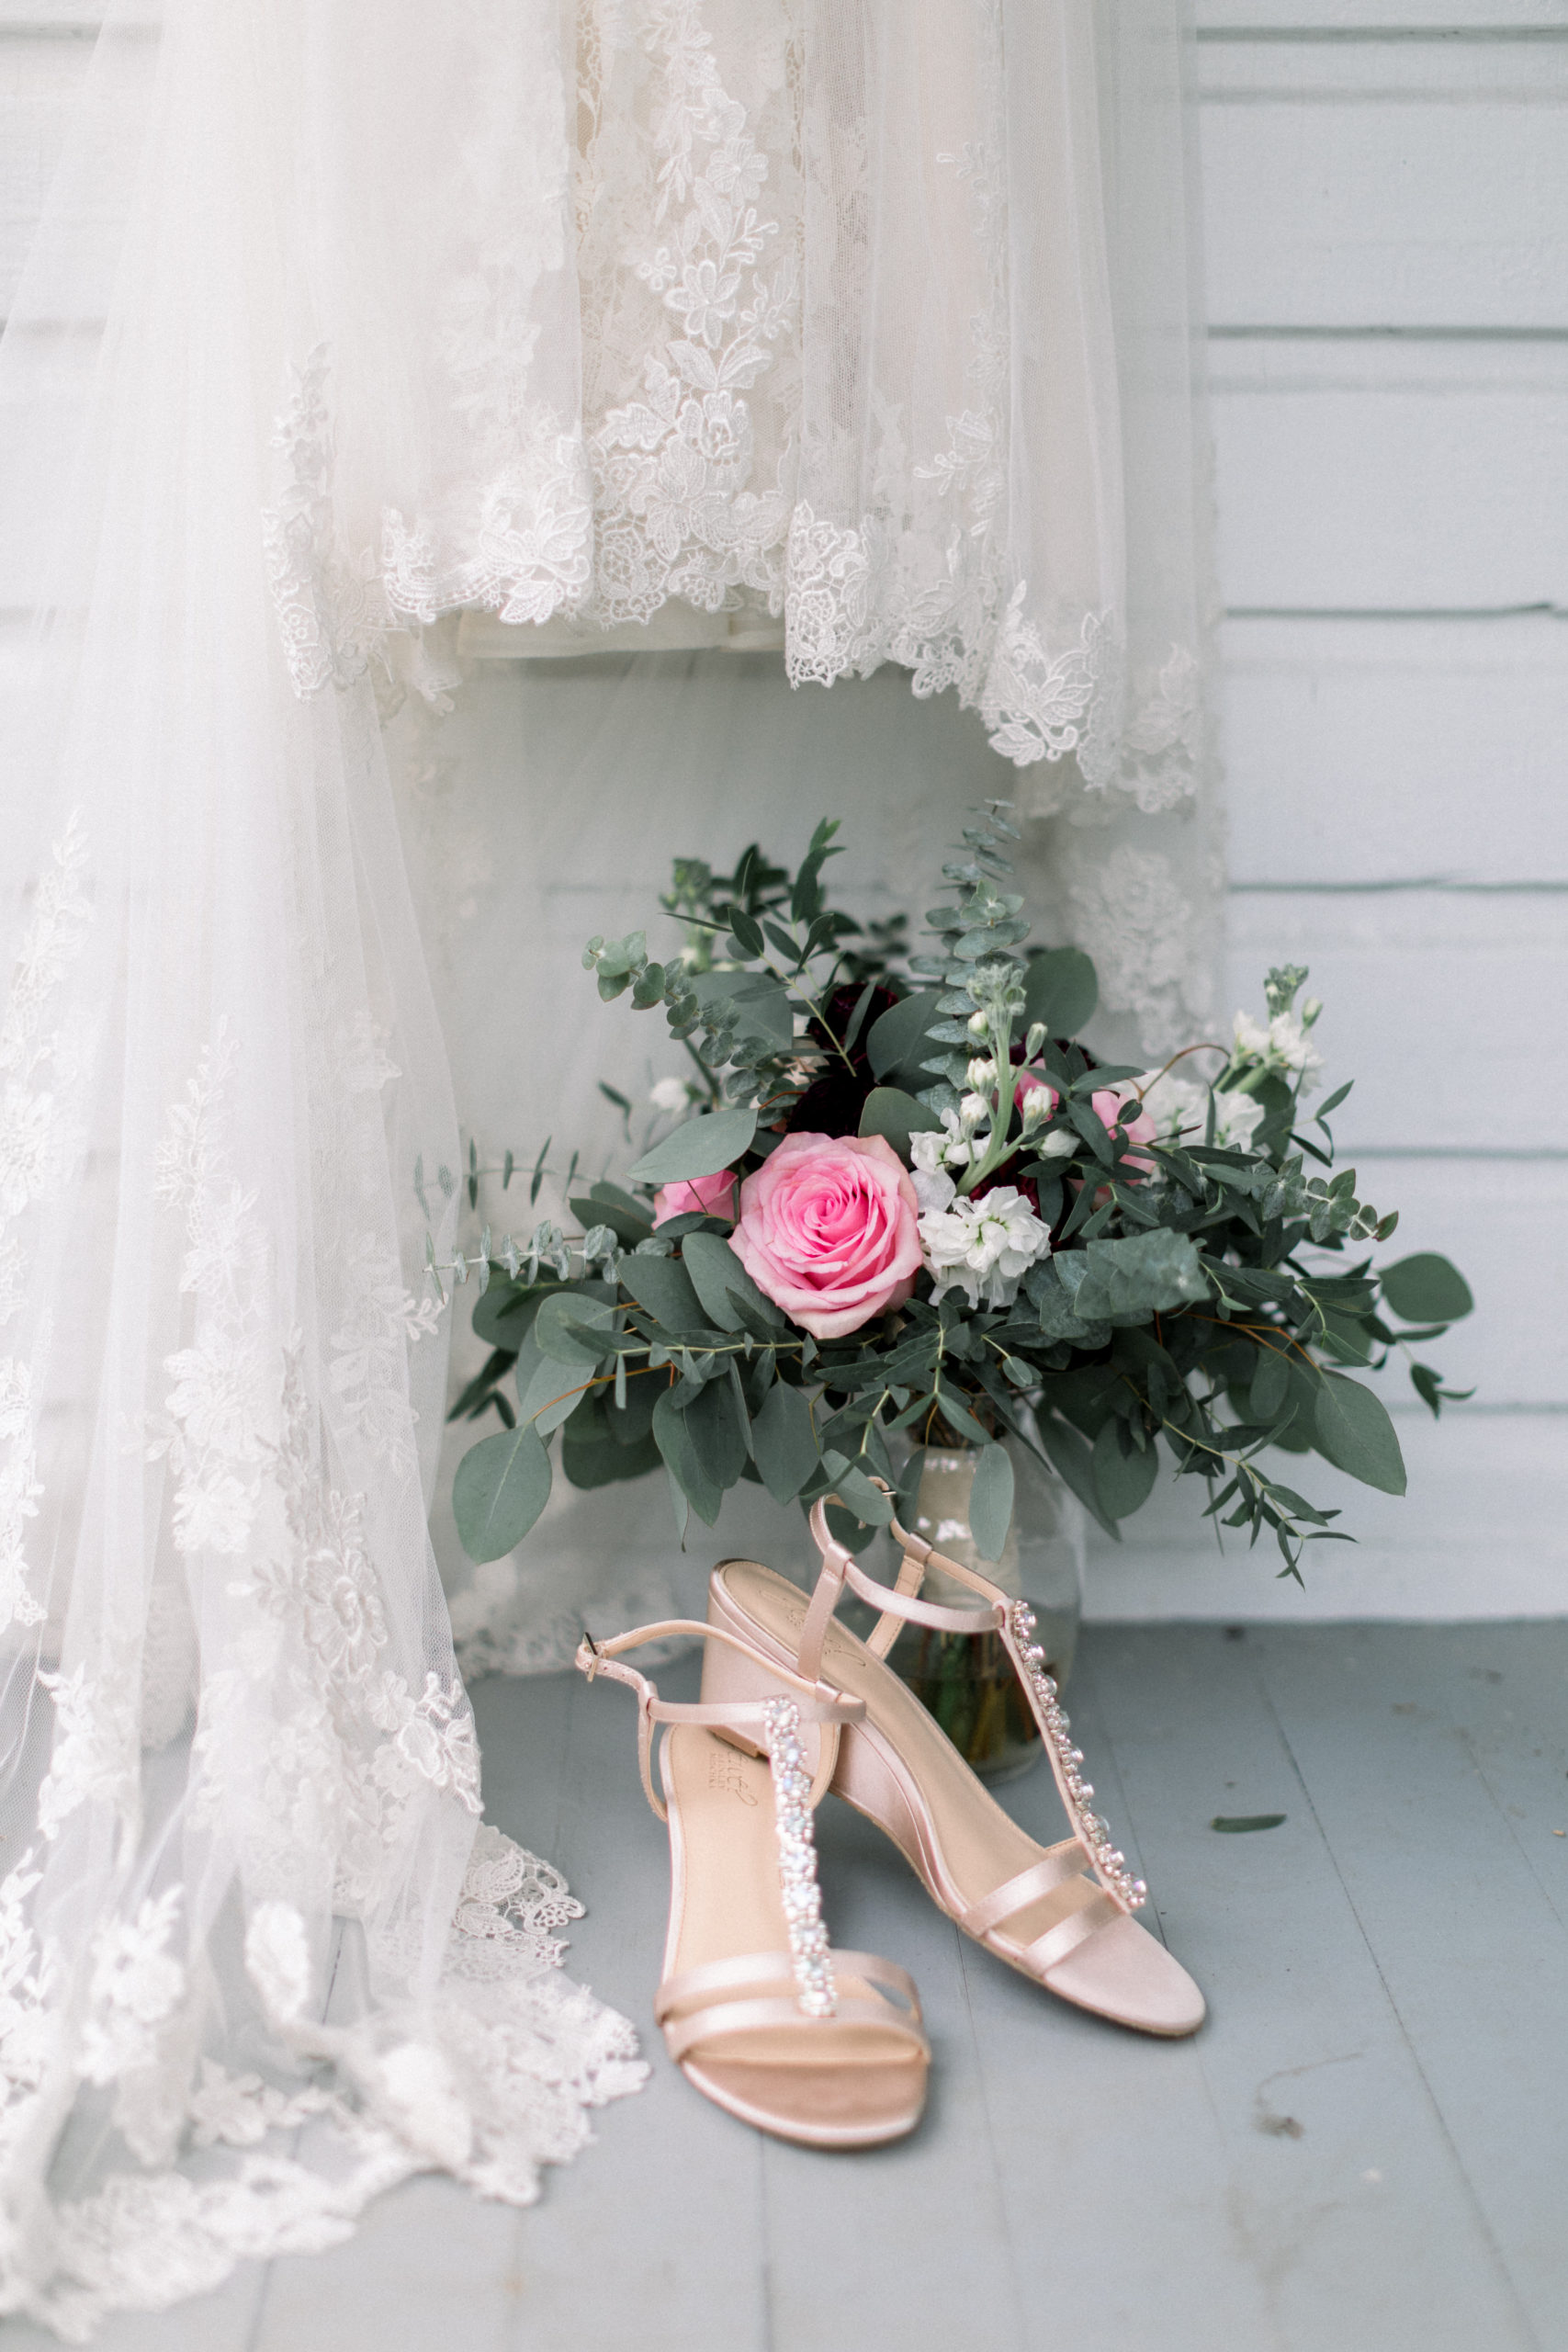 wedding details from the bride, gold bridal shoes, florals and more from chic Howard county conservancy wedding